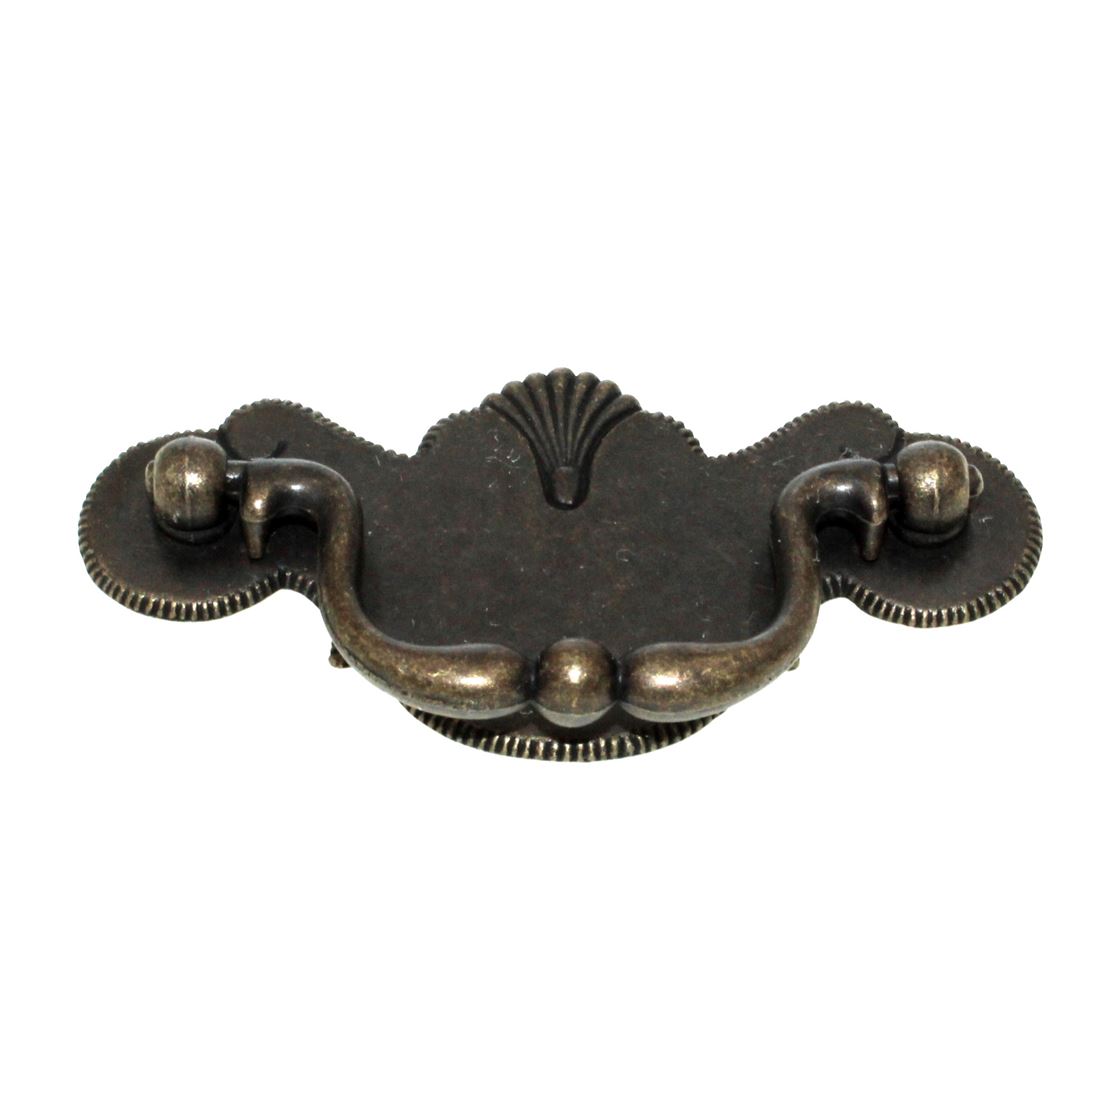 Belwith Palmetto Windover Antique 3" Ctr. Rustic Drawer Bail Pull PA0924-WOA